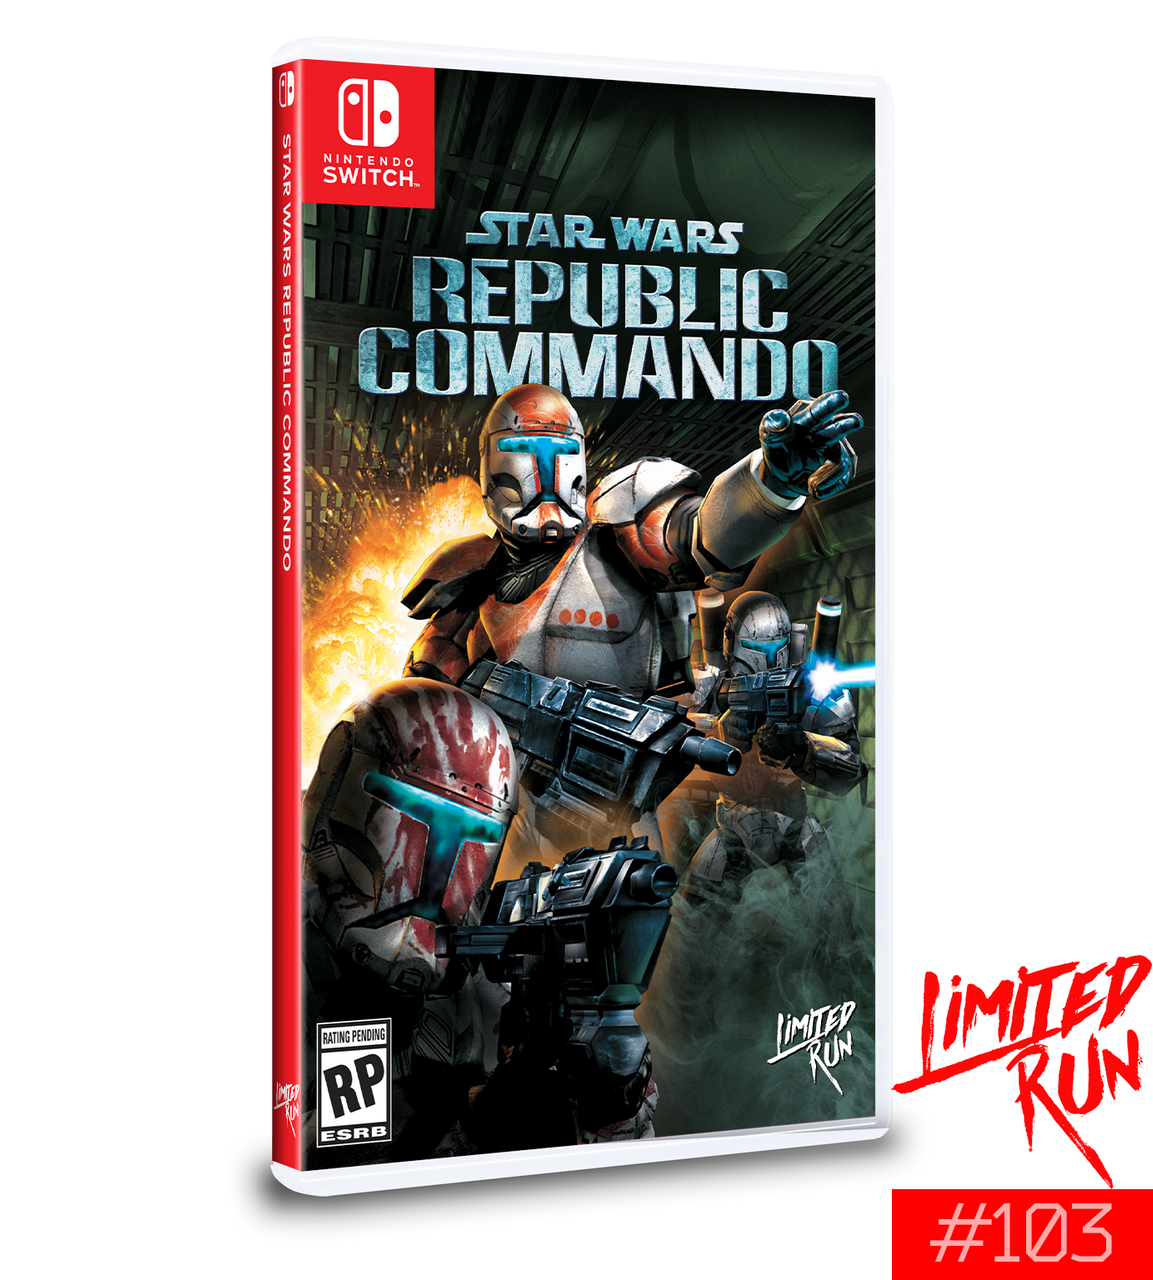 Star Wars Republic Commando for Nintendo Switch available at Videogamesnewyork, NY